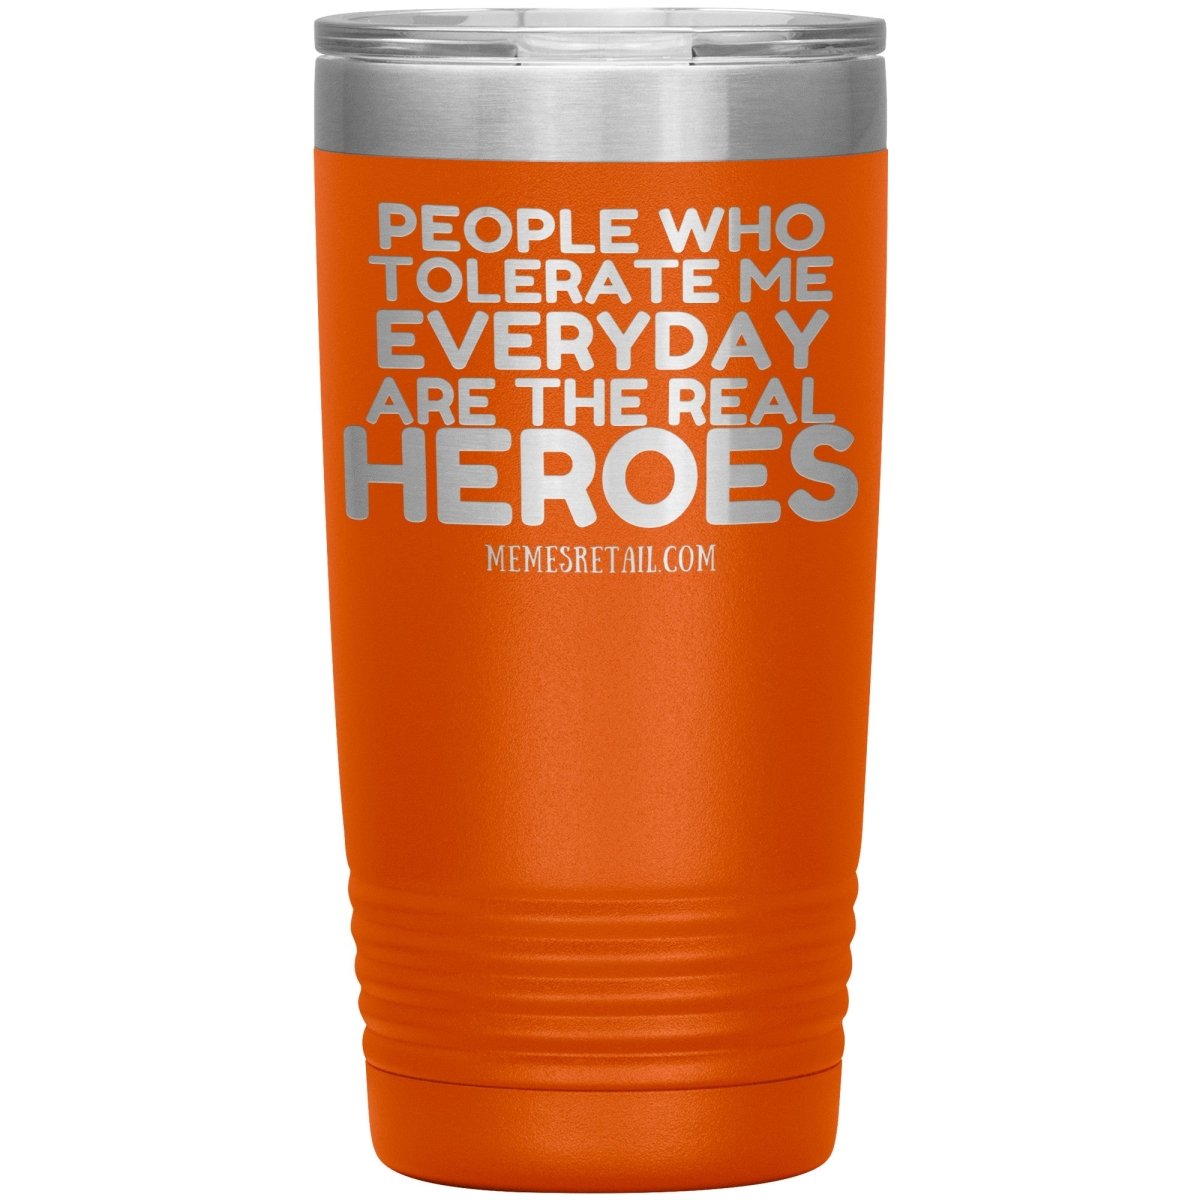 People Who Tolerate Me Everyday Are The Real Heroes Tumblers, 20oz Insulated Tumbler / Orange - MemesRetail.com